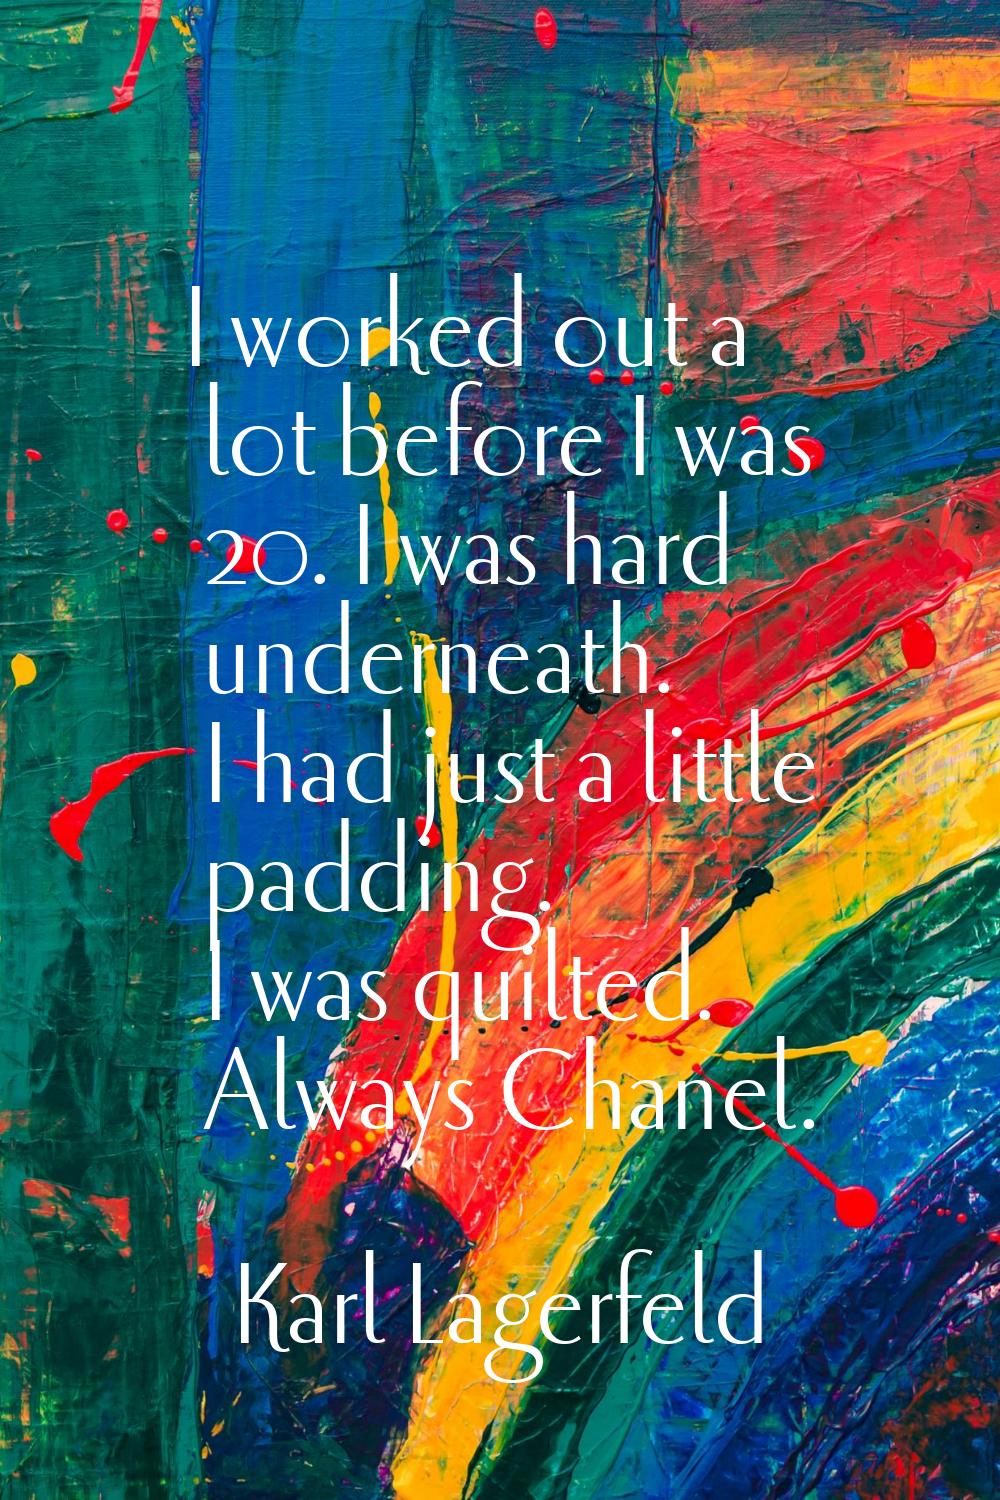 I worked out a lot before I was 20. I was hard underneath. I had just a little padding. I was quilt